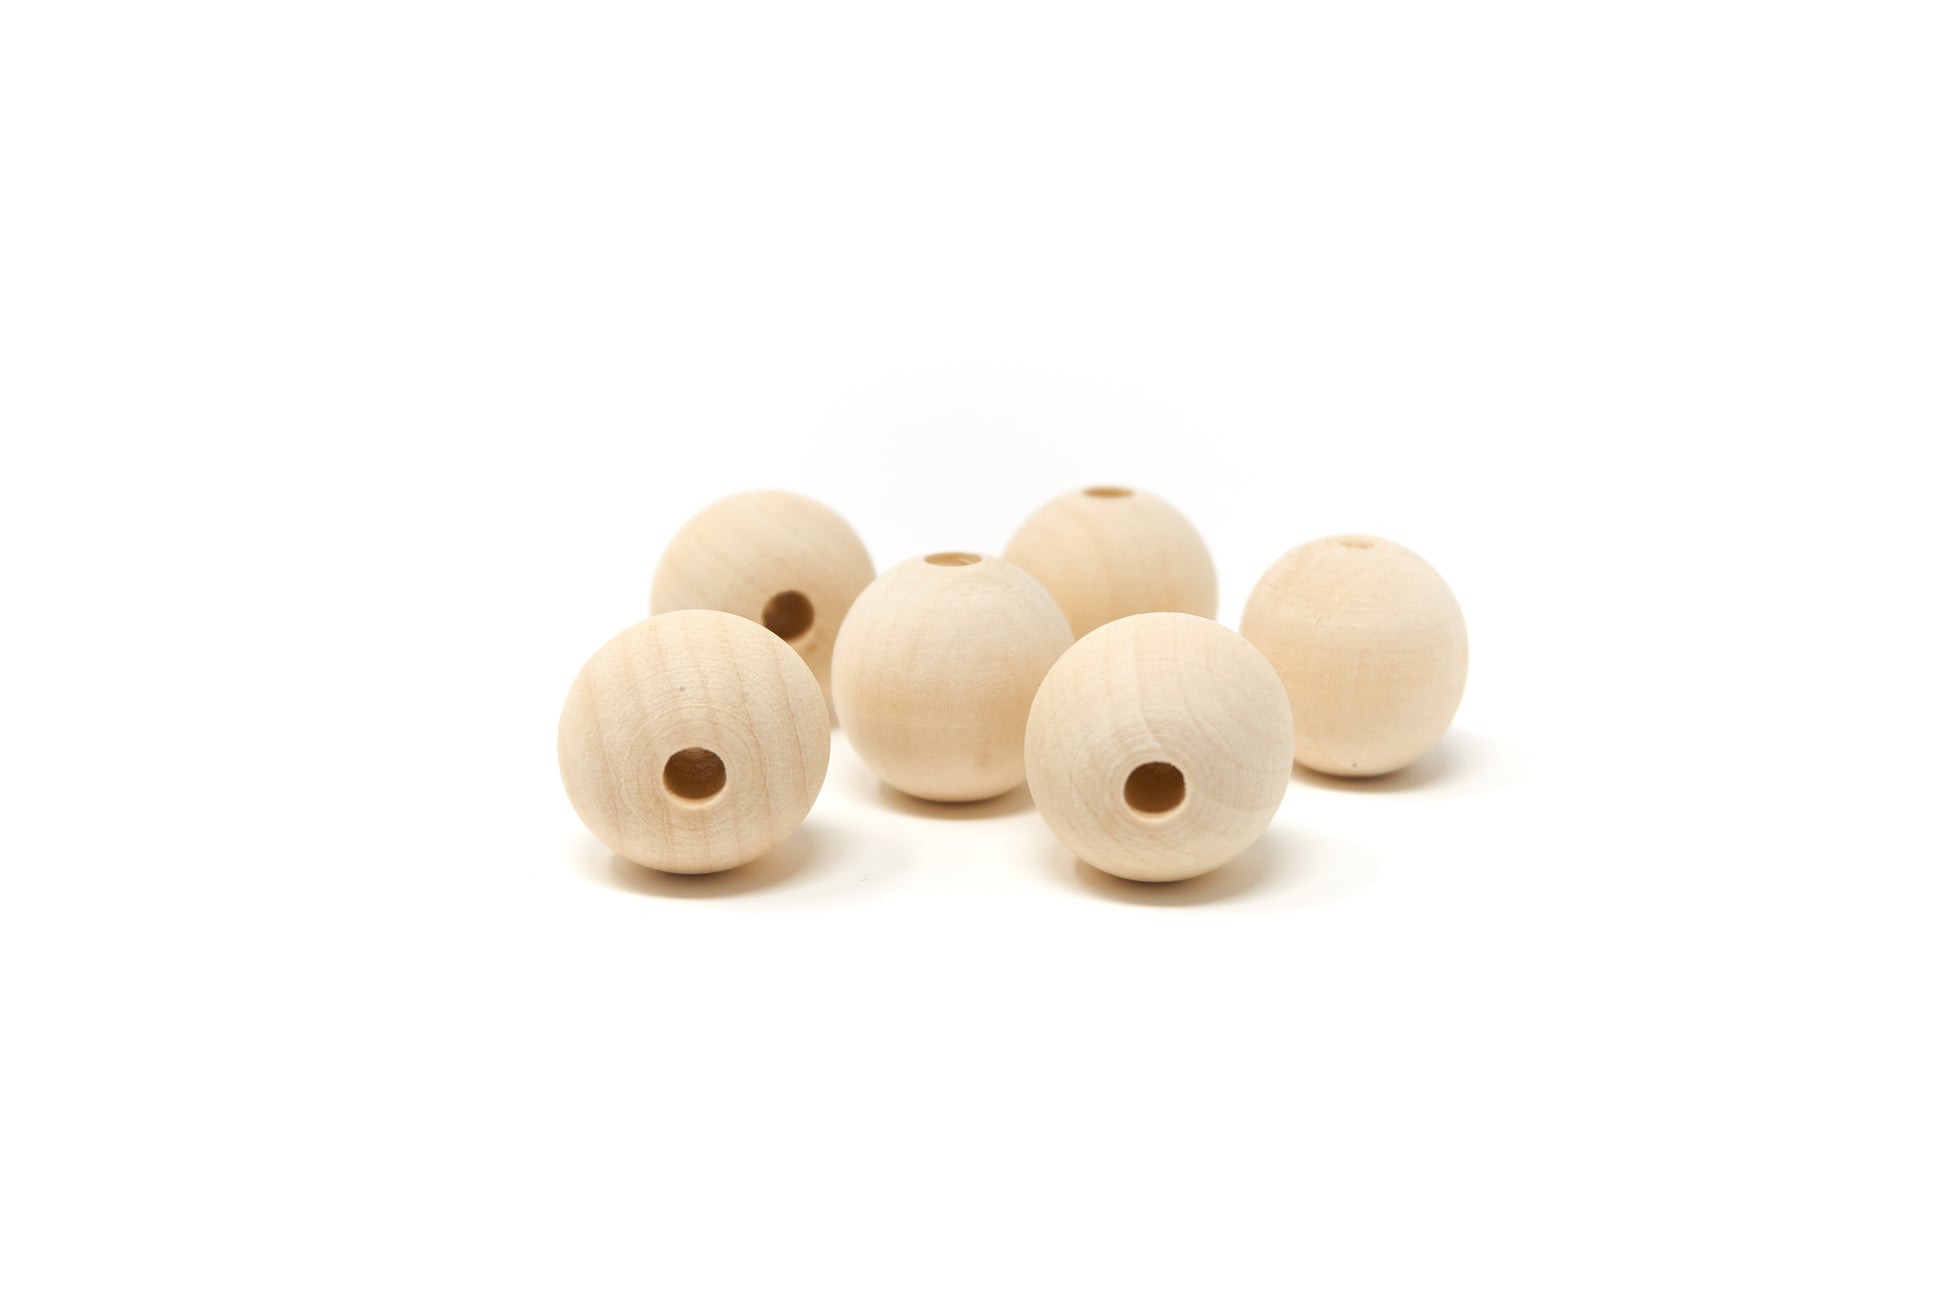 Natural Round Wood Beads 25mm 20 pieces - Cameos Art Shop